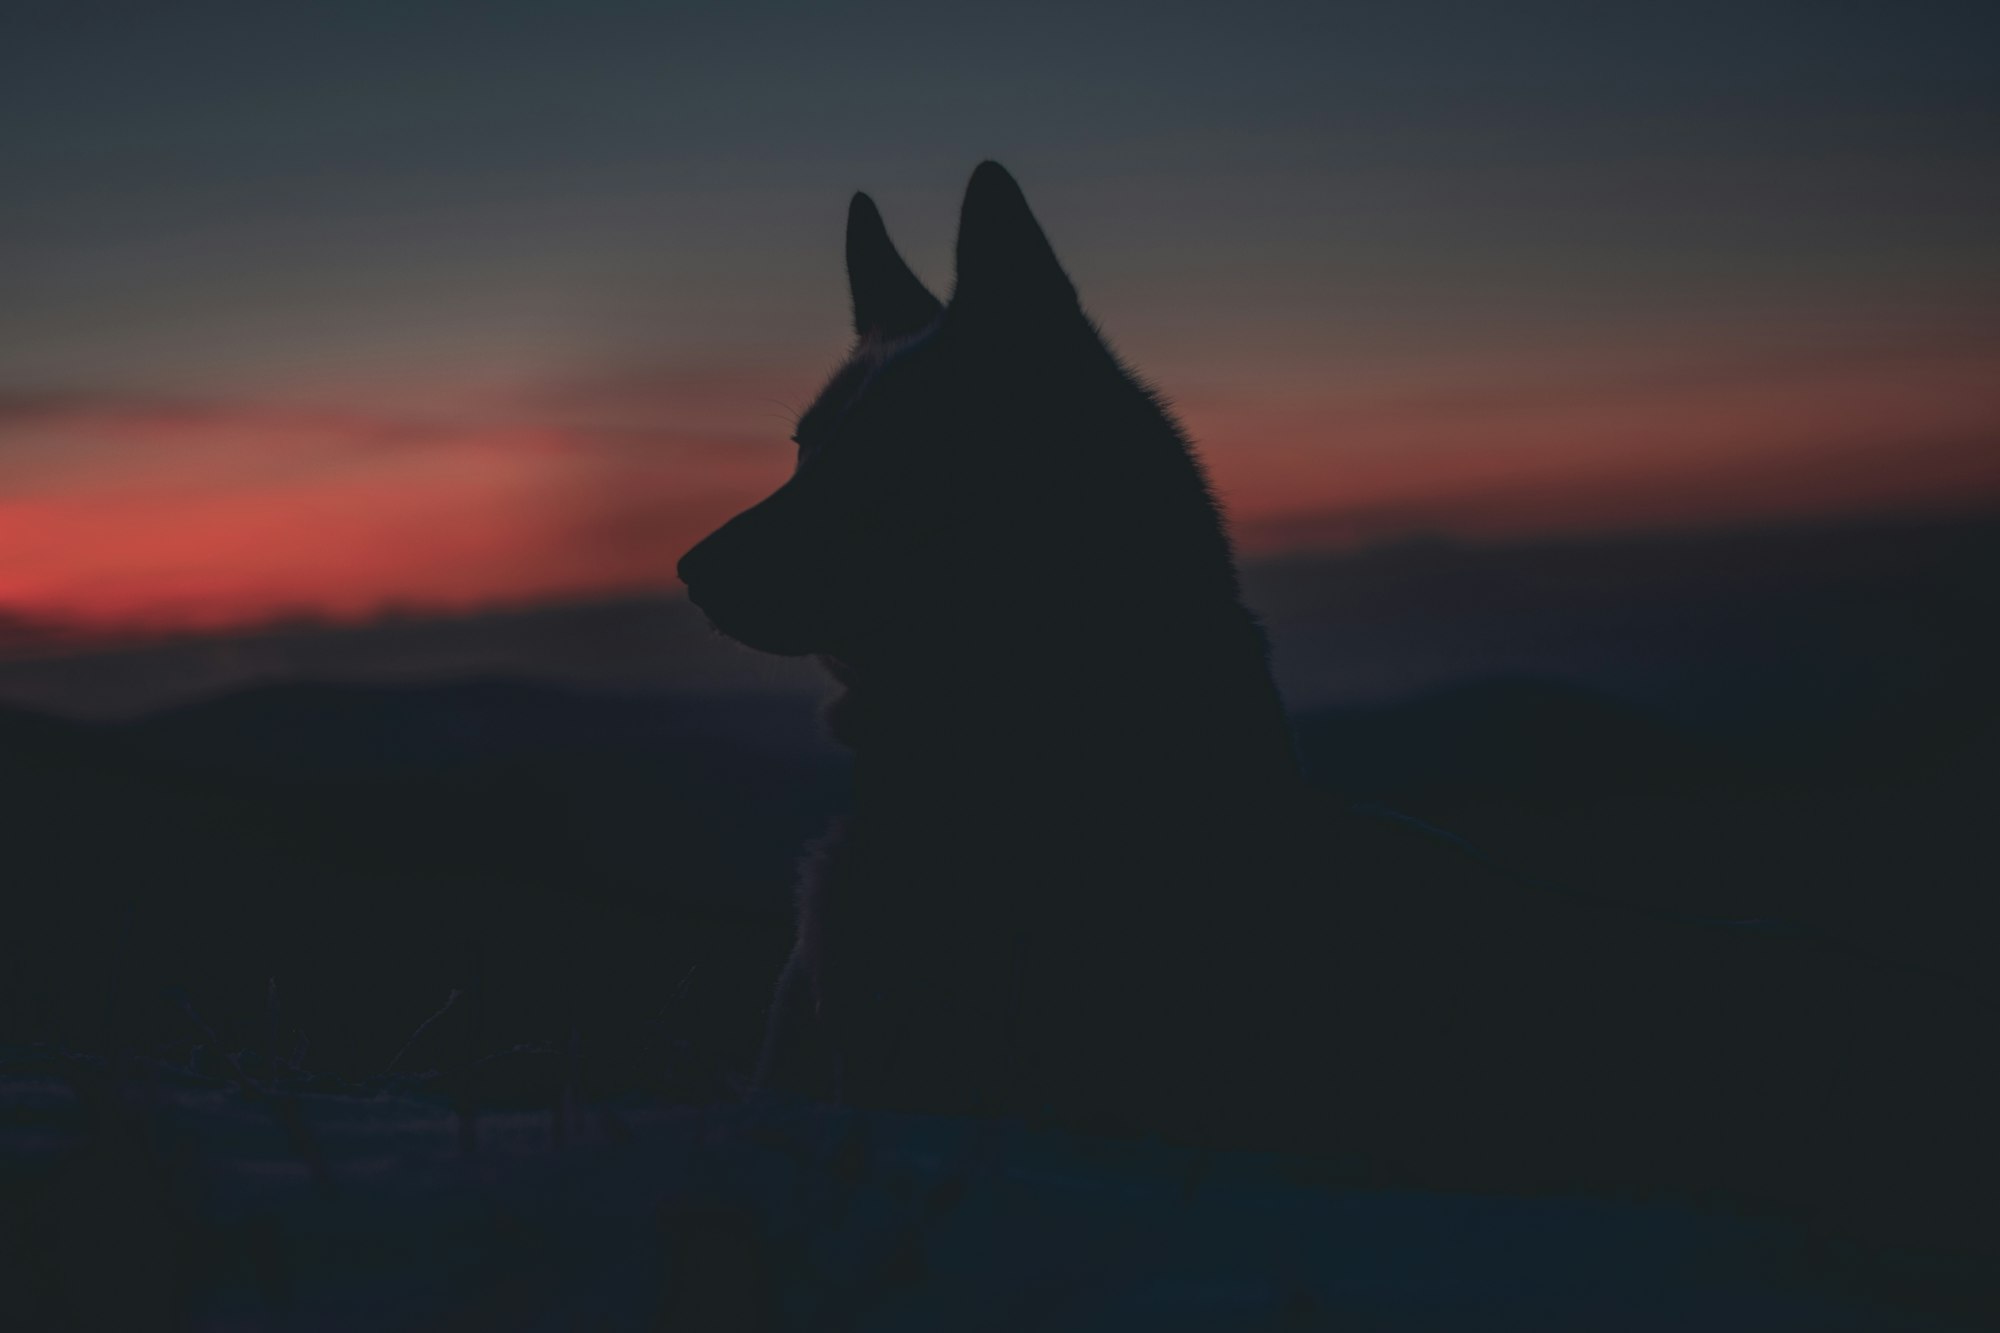 Dimly lit close up of a wolf looking off to one side, lonely, at dusk with a red night sky.